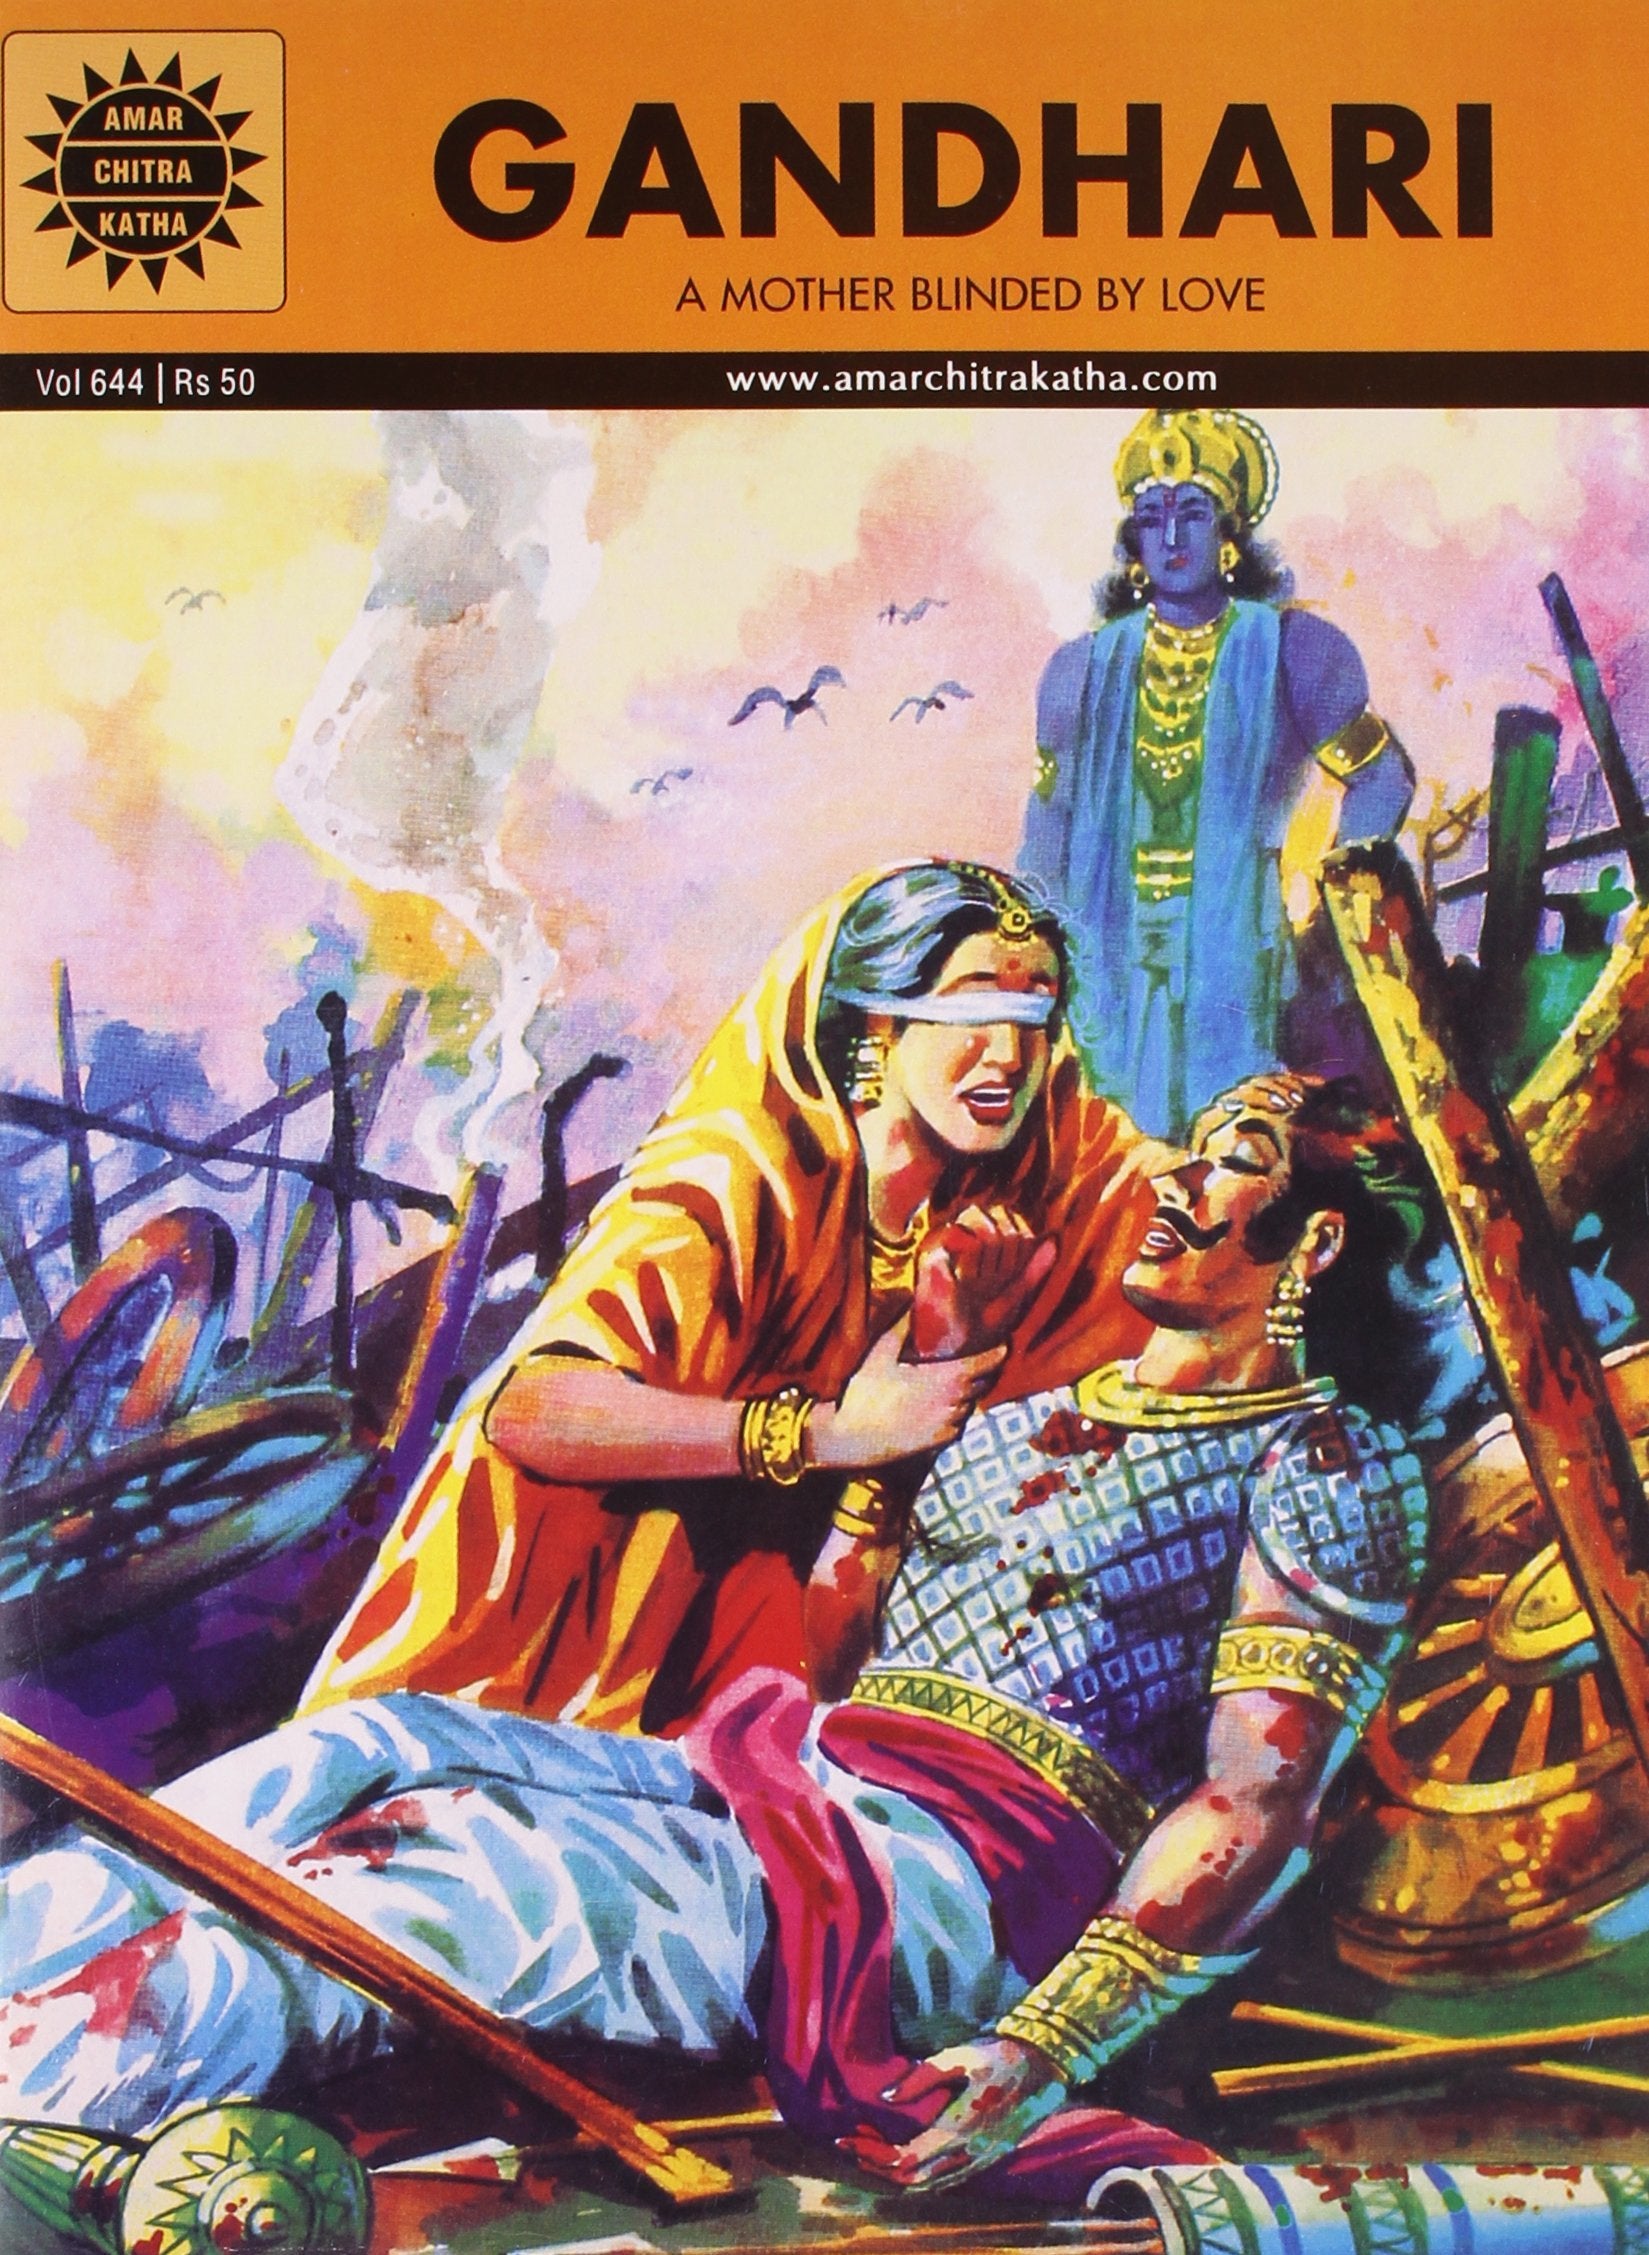 Gandhari: A Mother Blinded By Love